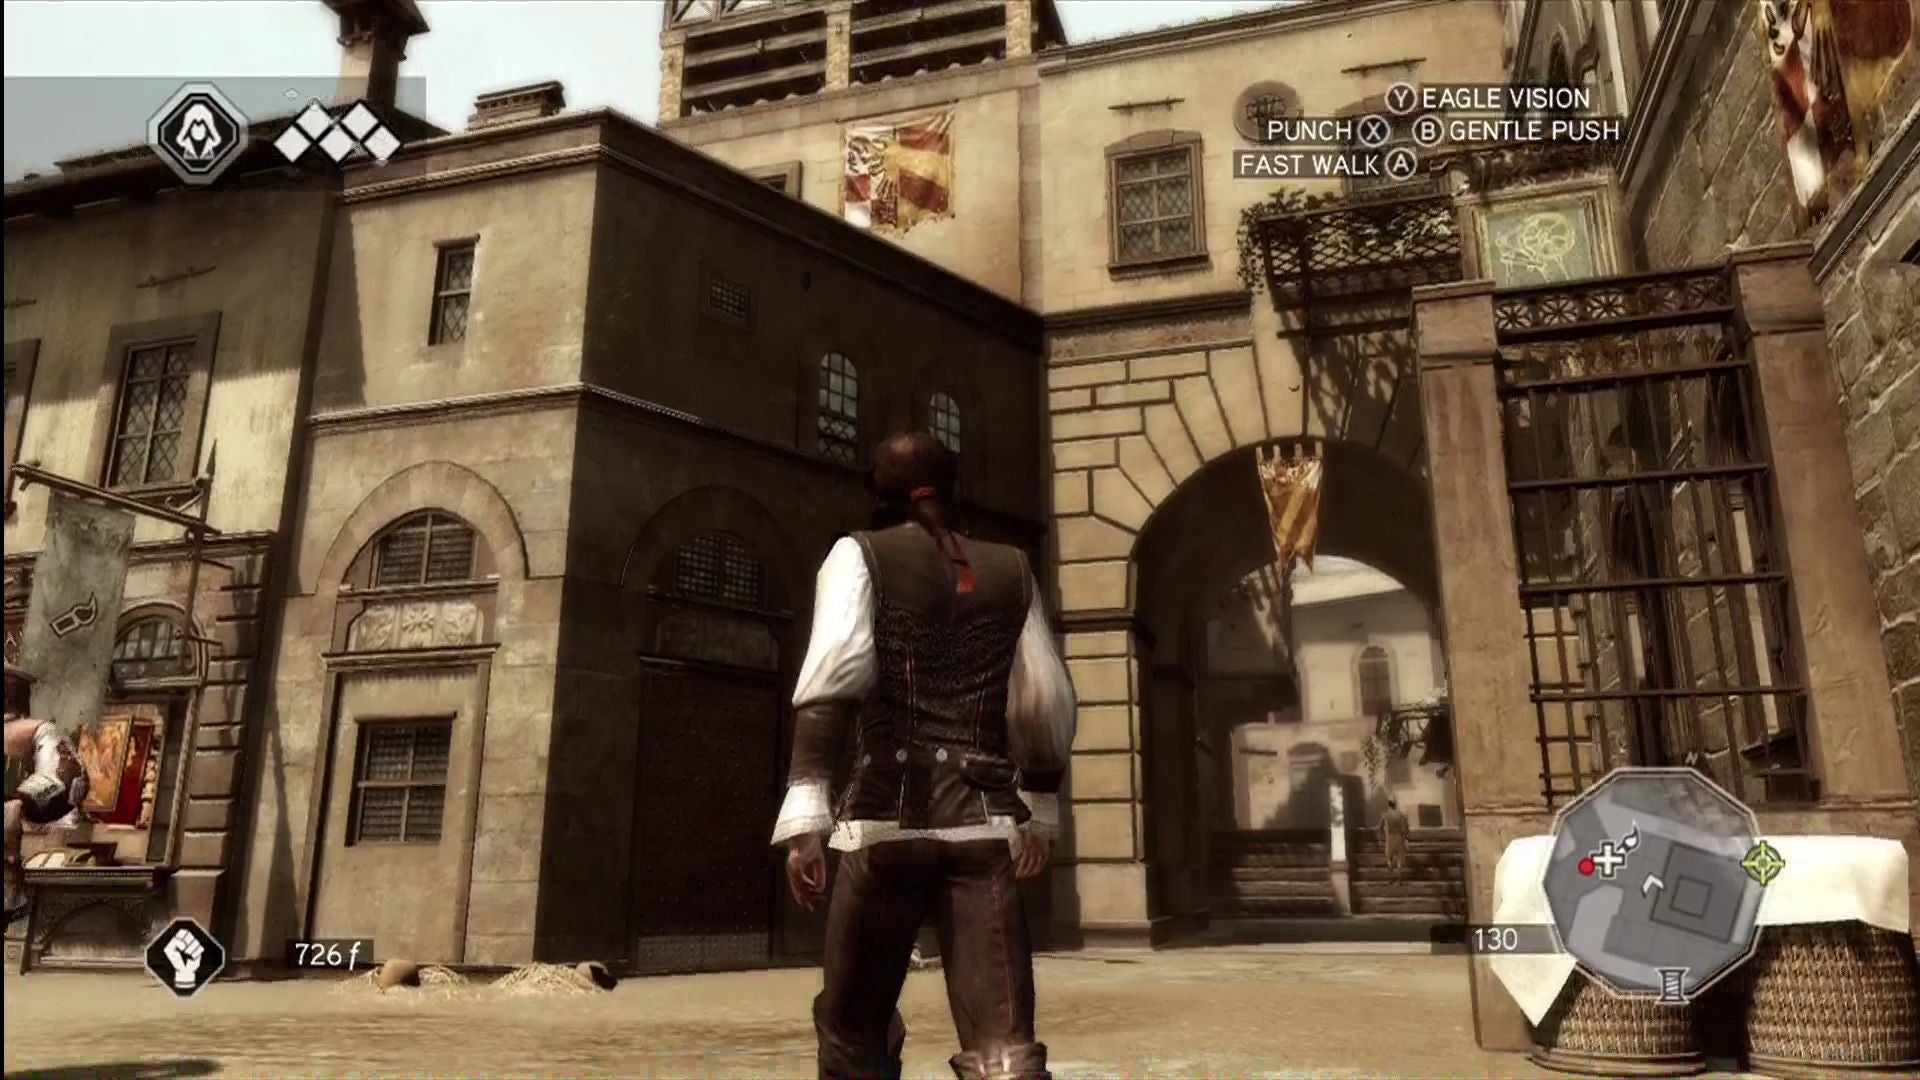 Assassin's Creed II (Platinum Hits) - Xbox 360 Game